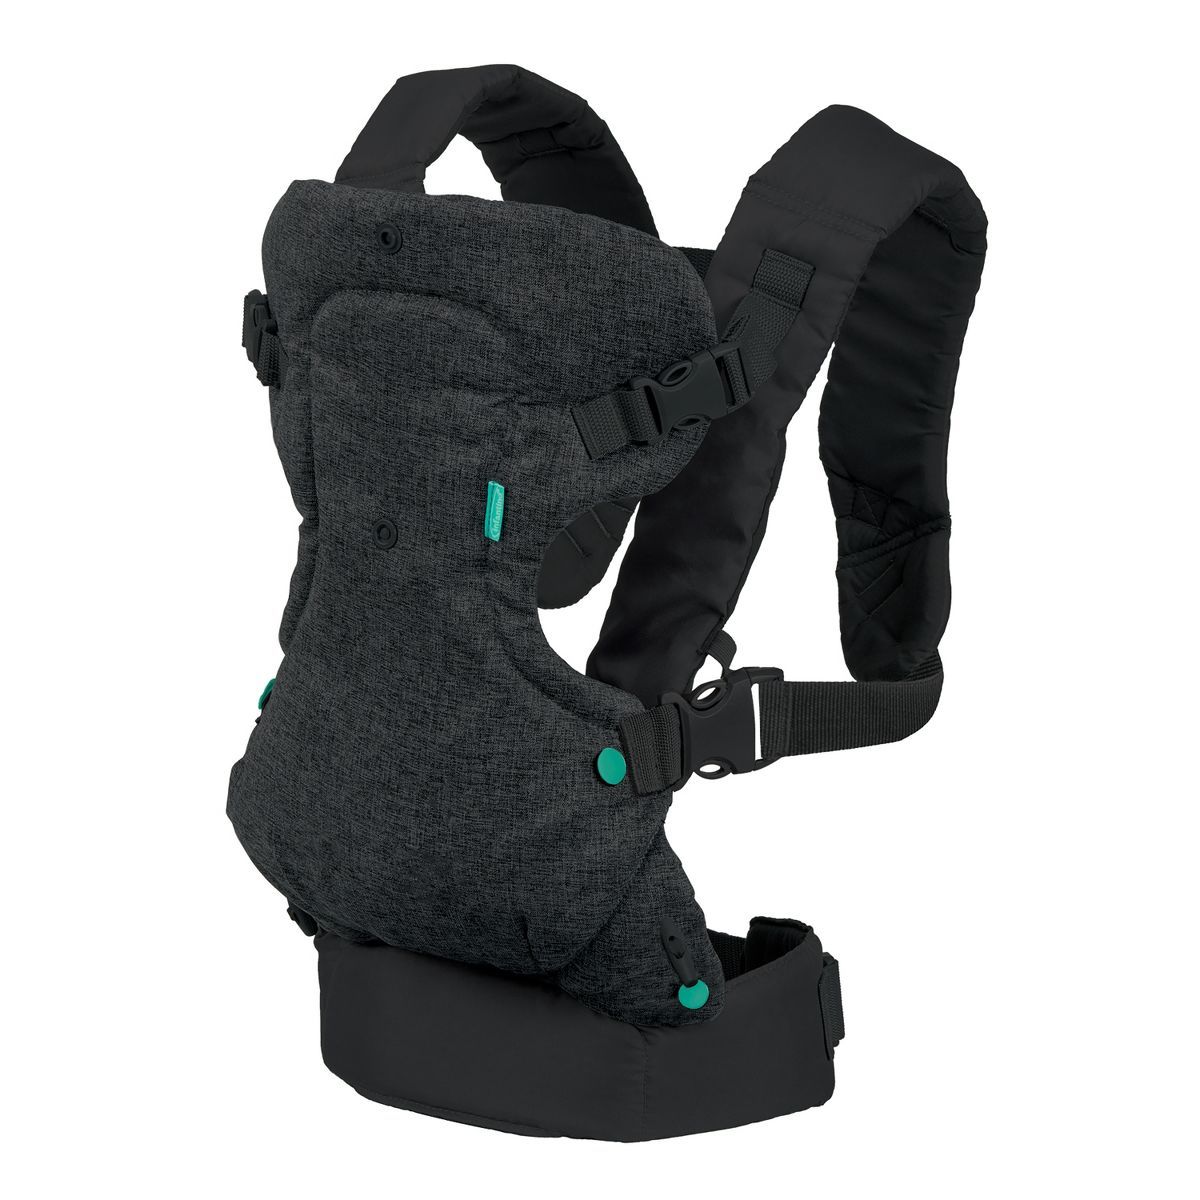 Infantino Flip 4-In-1 Convertible Baby Carrier | Target